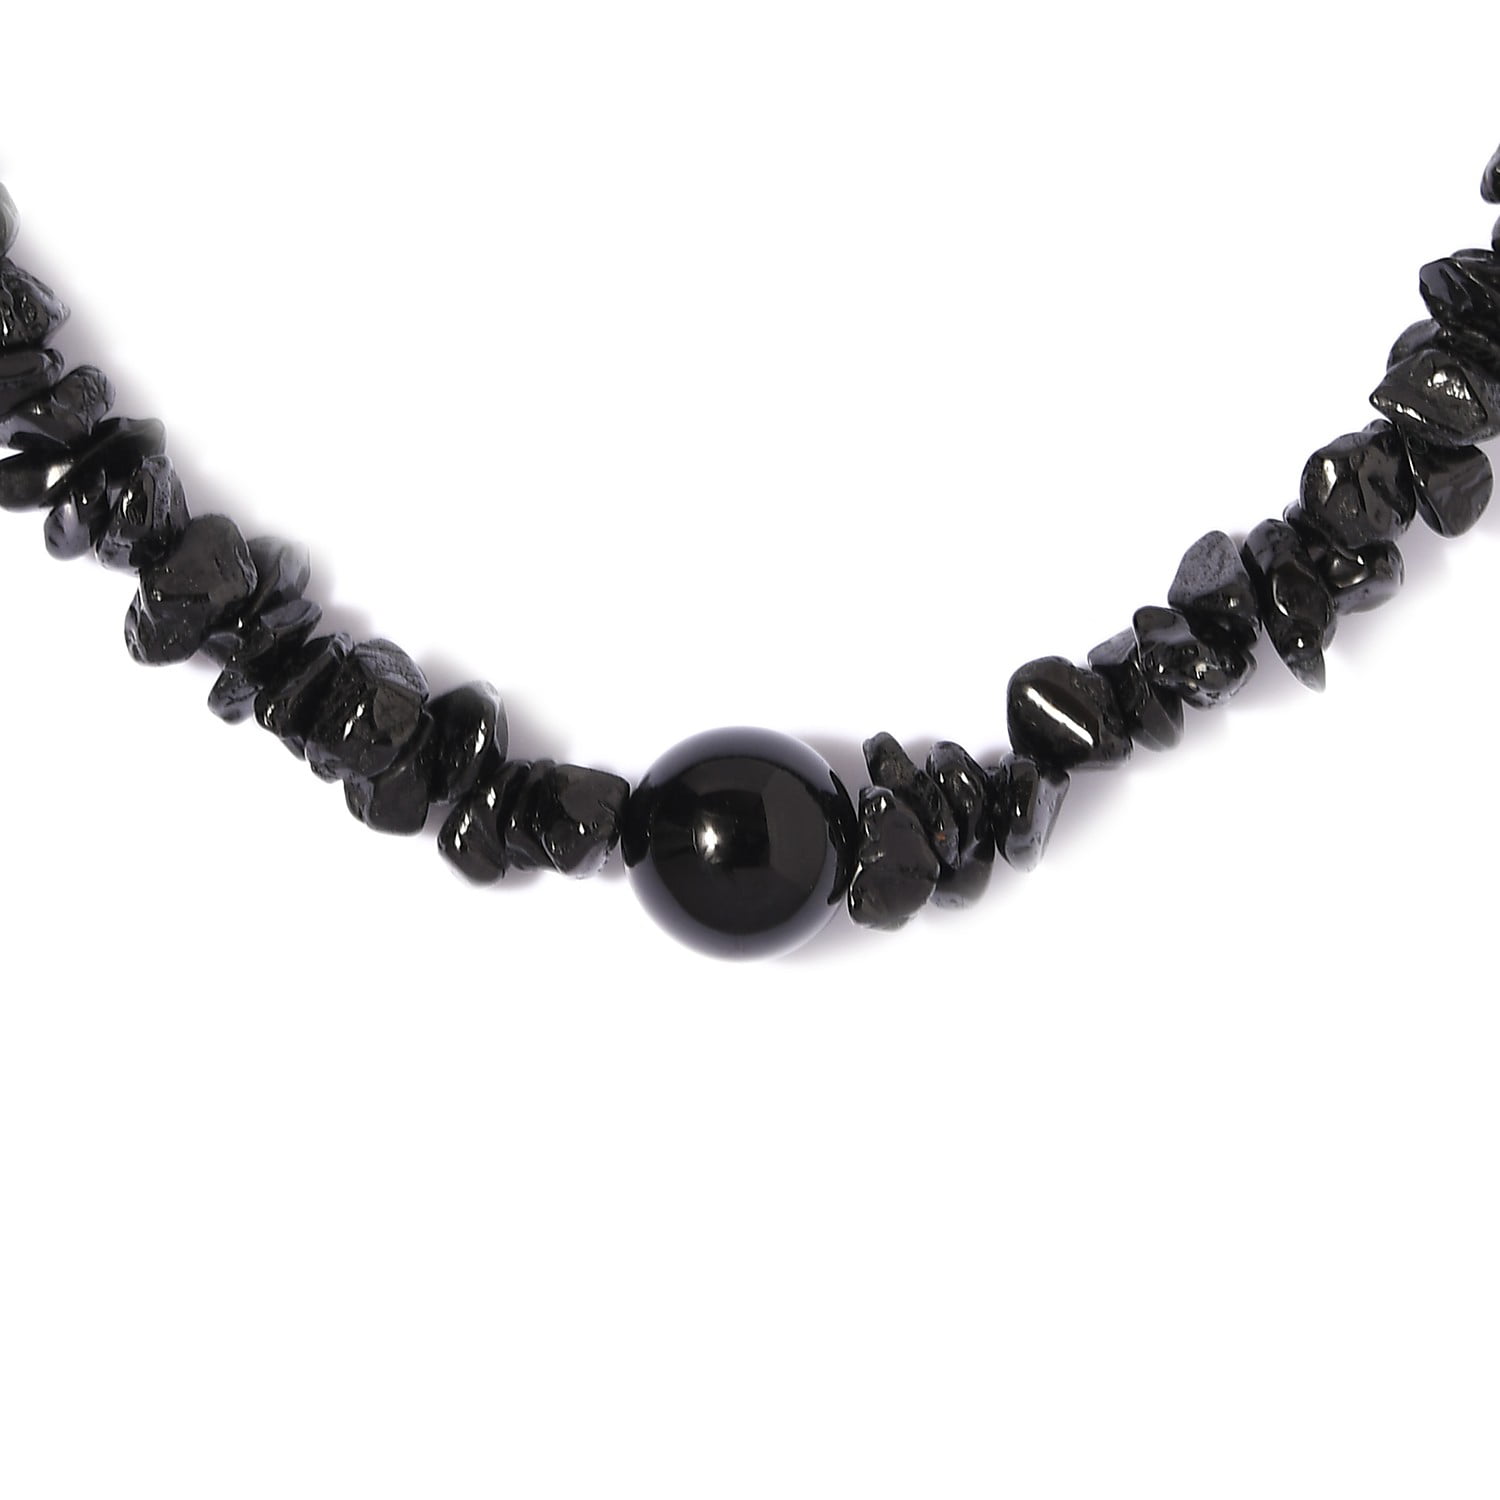 Necklace 3Strands Black Onyx Facet Round Beads and white Pearls 18-20"